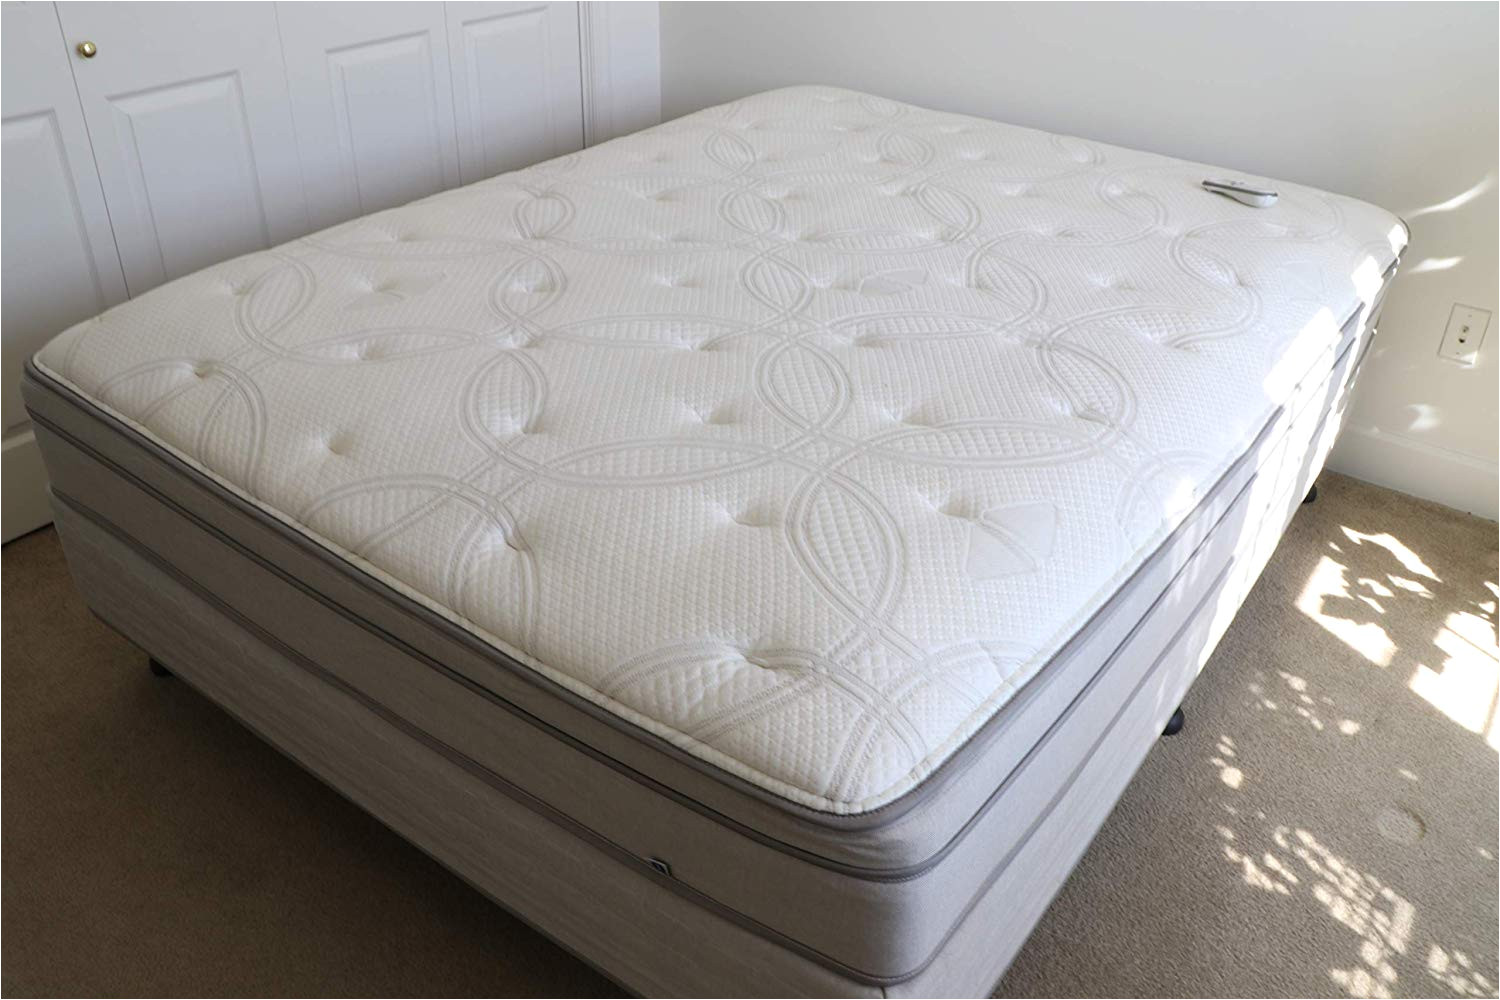 amazon com used select comfort sleep number queen size complete mattress p5 model comes 2 chambers dual hose pump wireless remote home kitchen